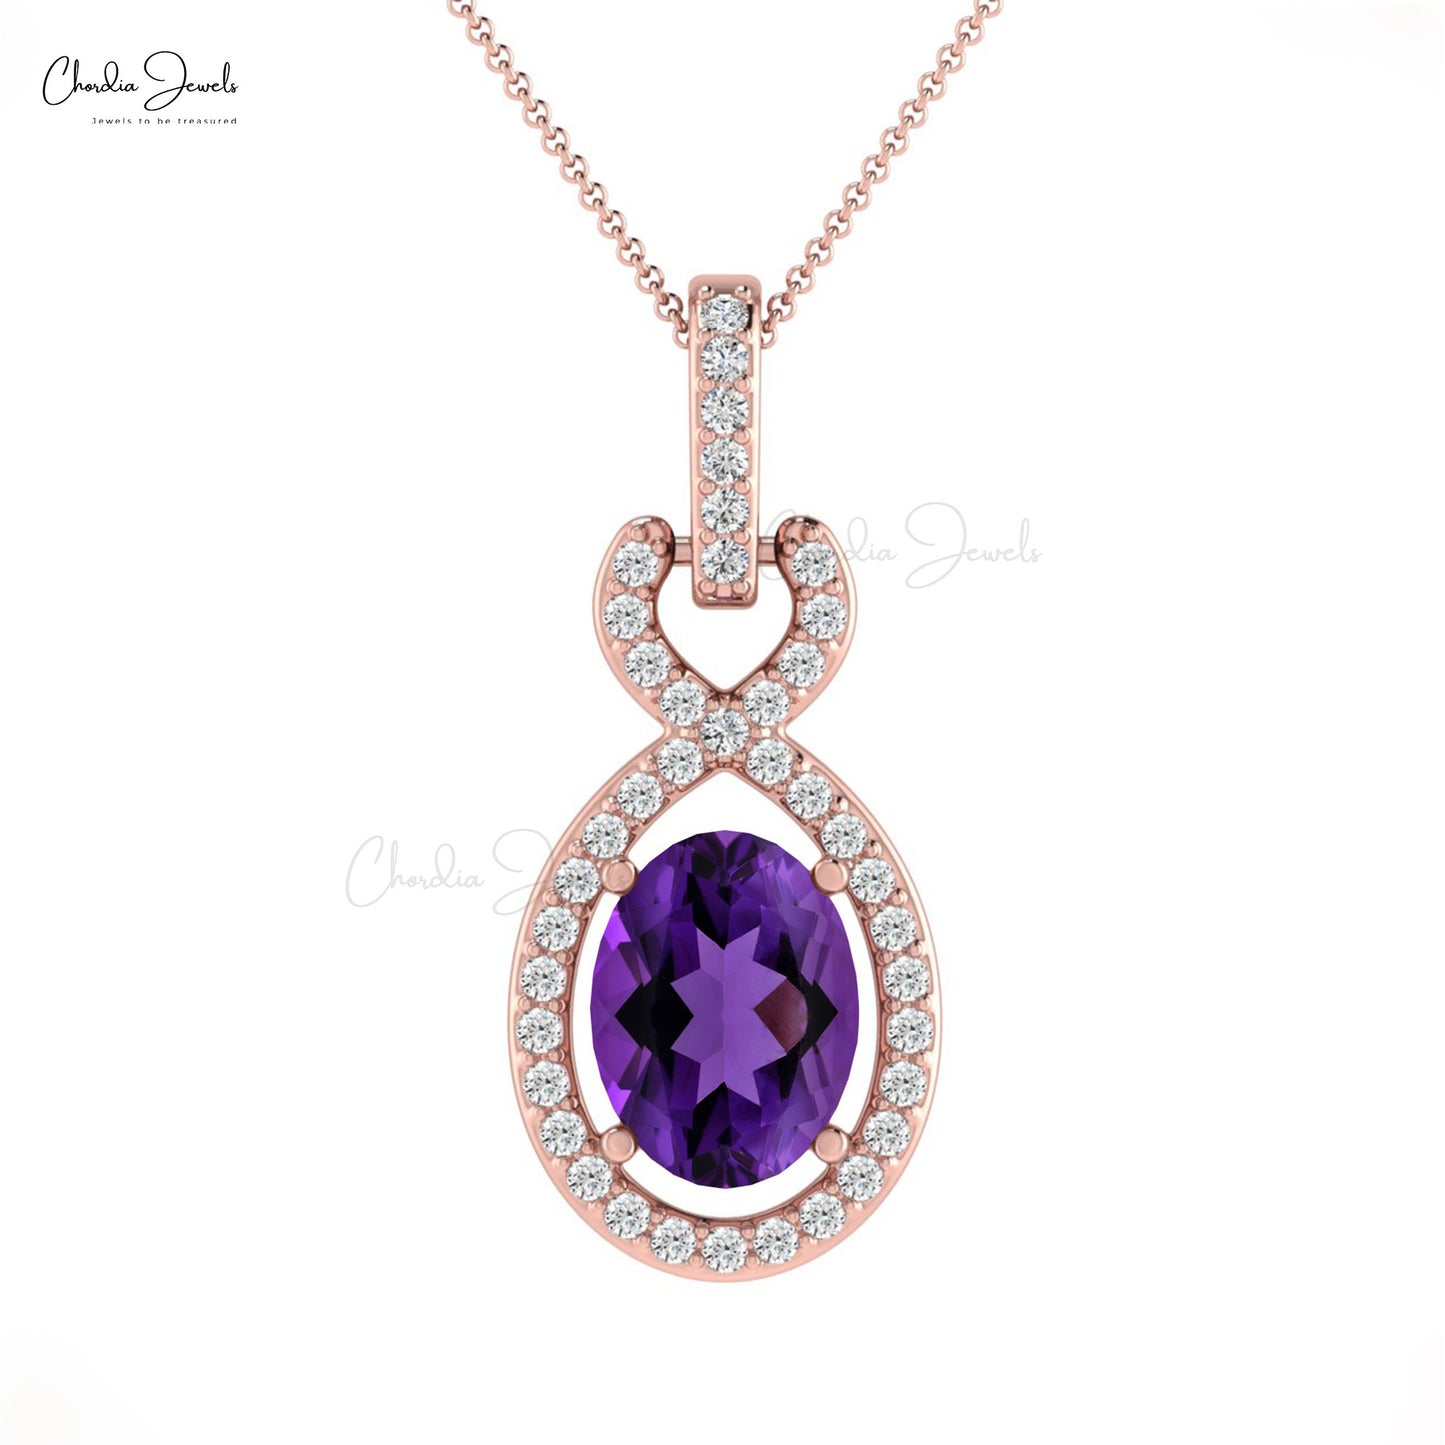 New Designs Jewelry Natural White Diamond Halo Pendant Necklace Purple Amethyst Gemstone Pendant in 14k Real Gold Hallmarked Jewelry For Gift